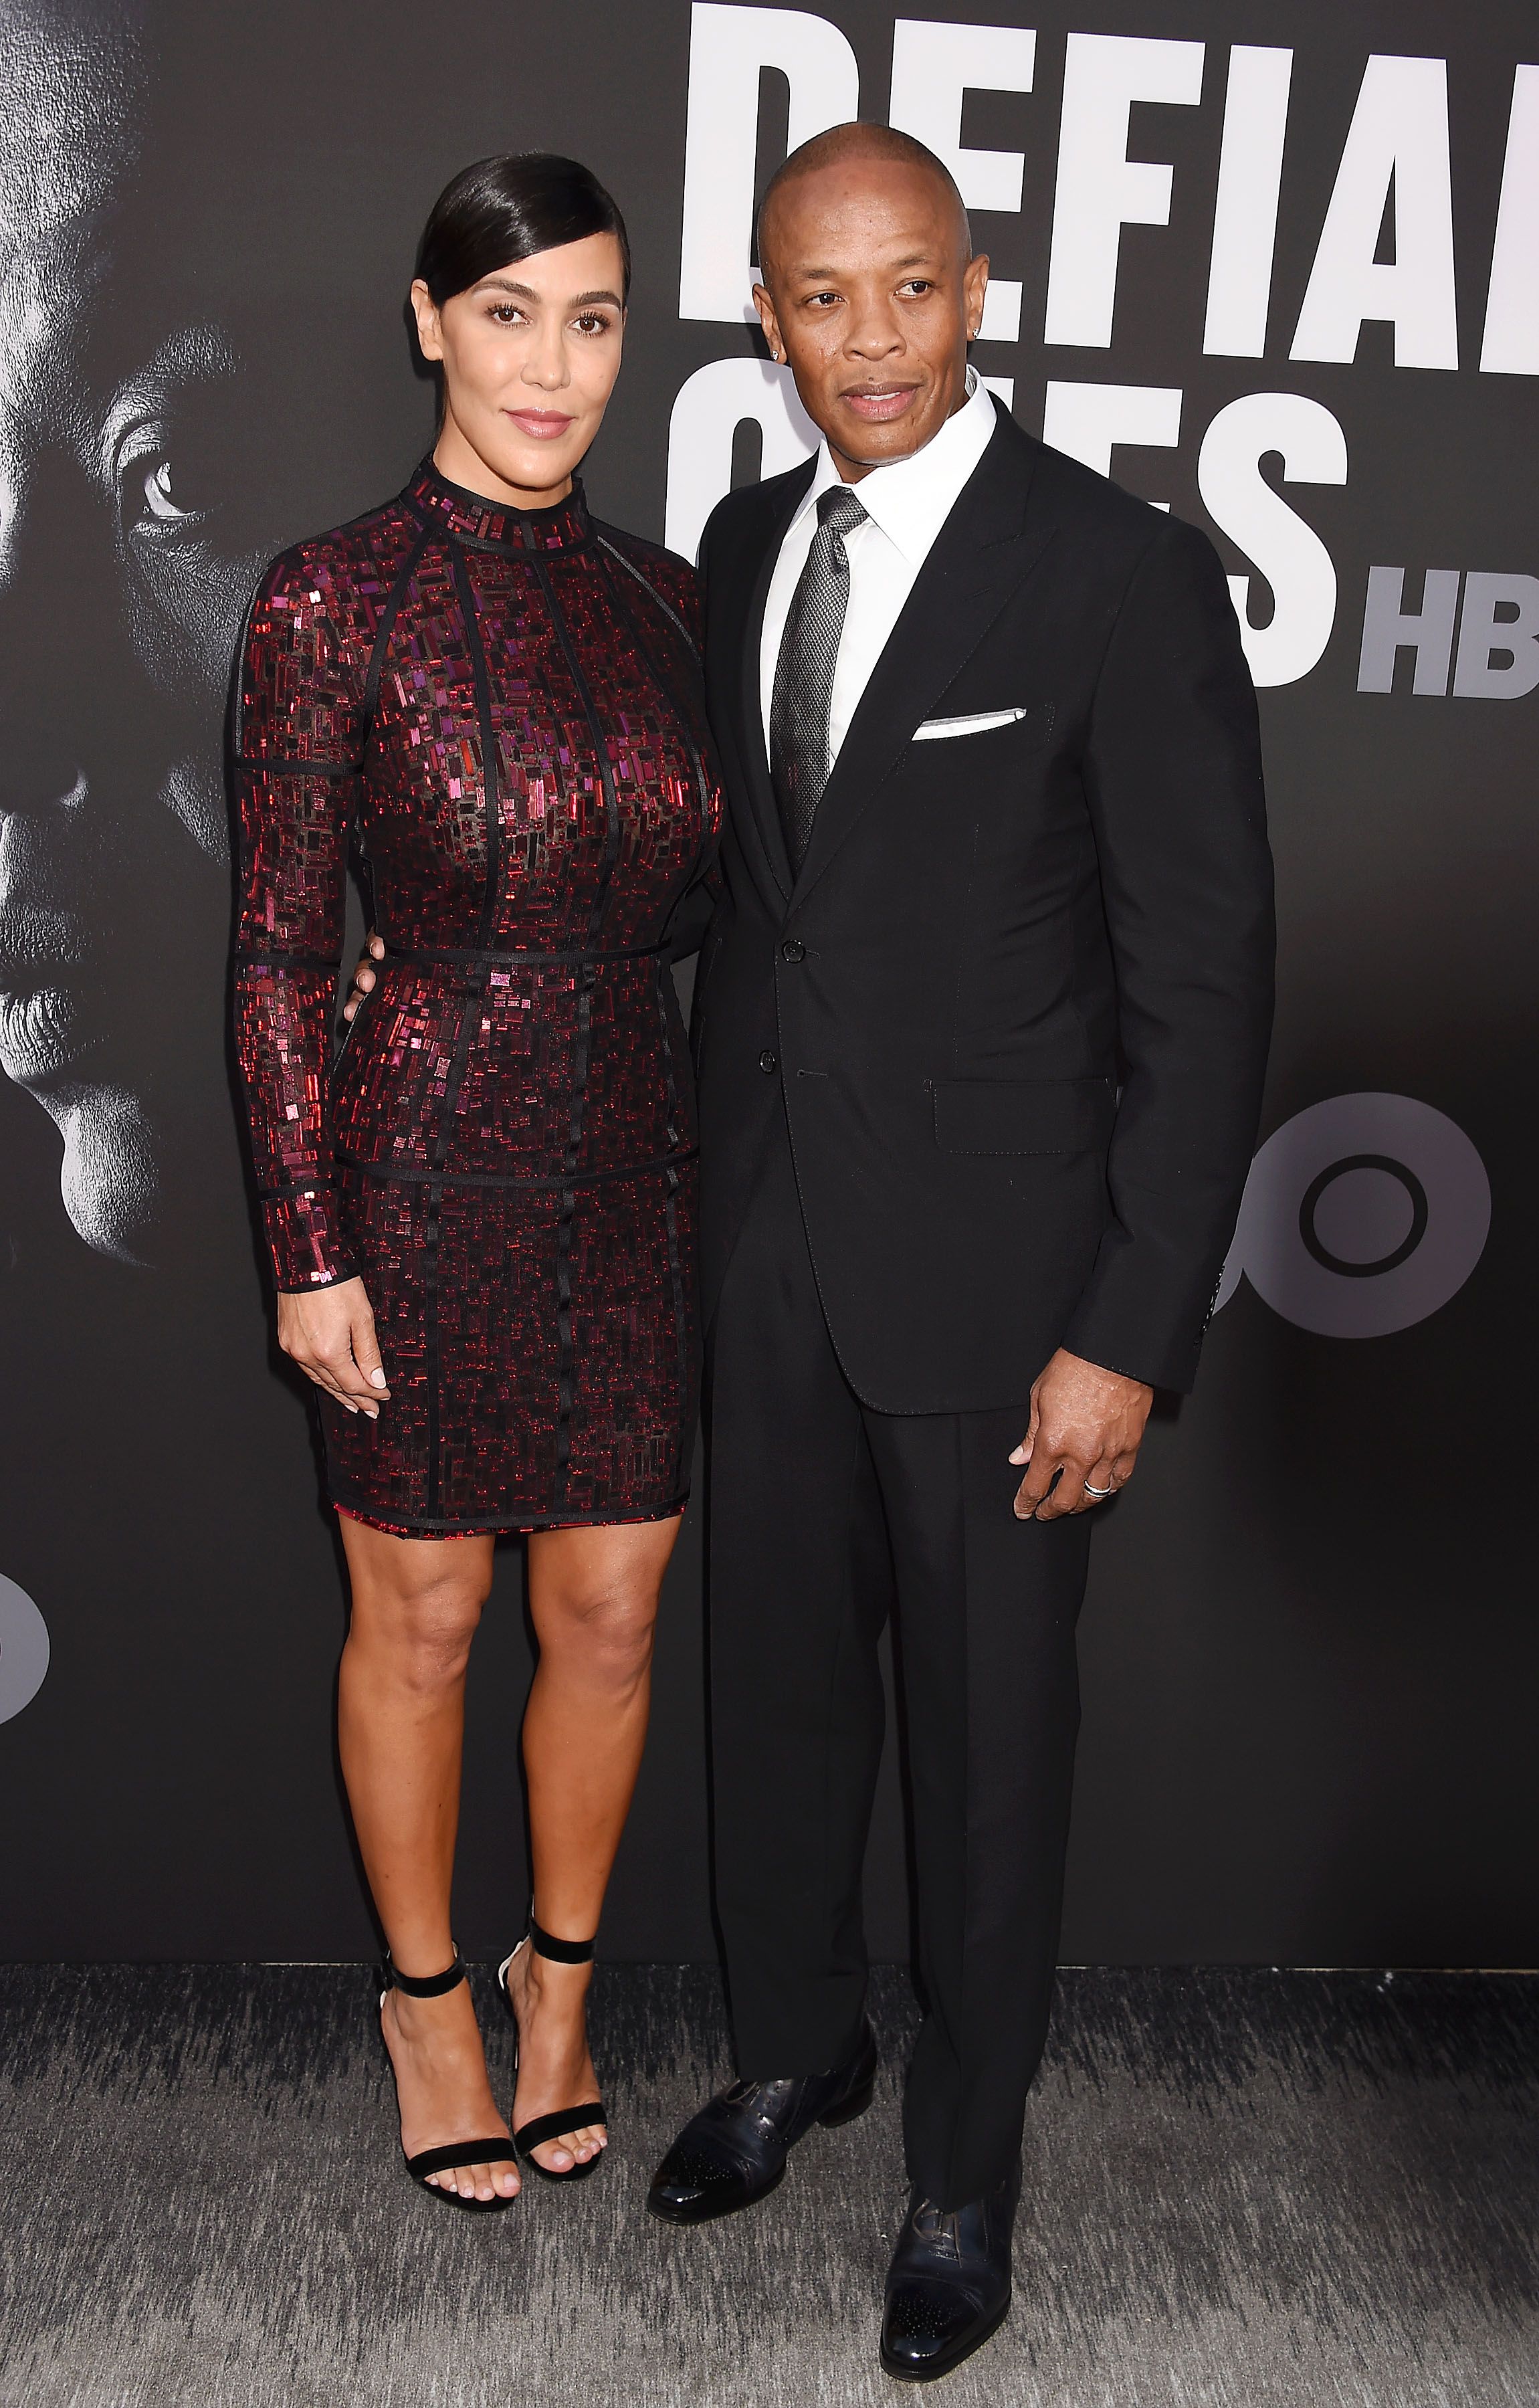 Nicole Young and Dr. Dre at the premiere of HBO's "The Defiant Ones" on June 22, 2017, in Hollywood, California | Photo: Jeffrey Mayer/WireImage/Getty Images